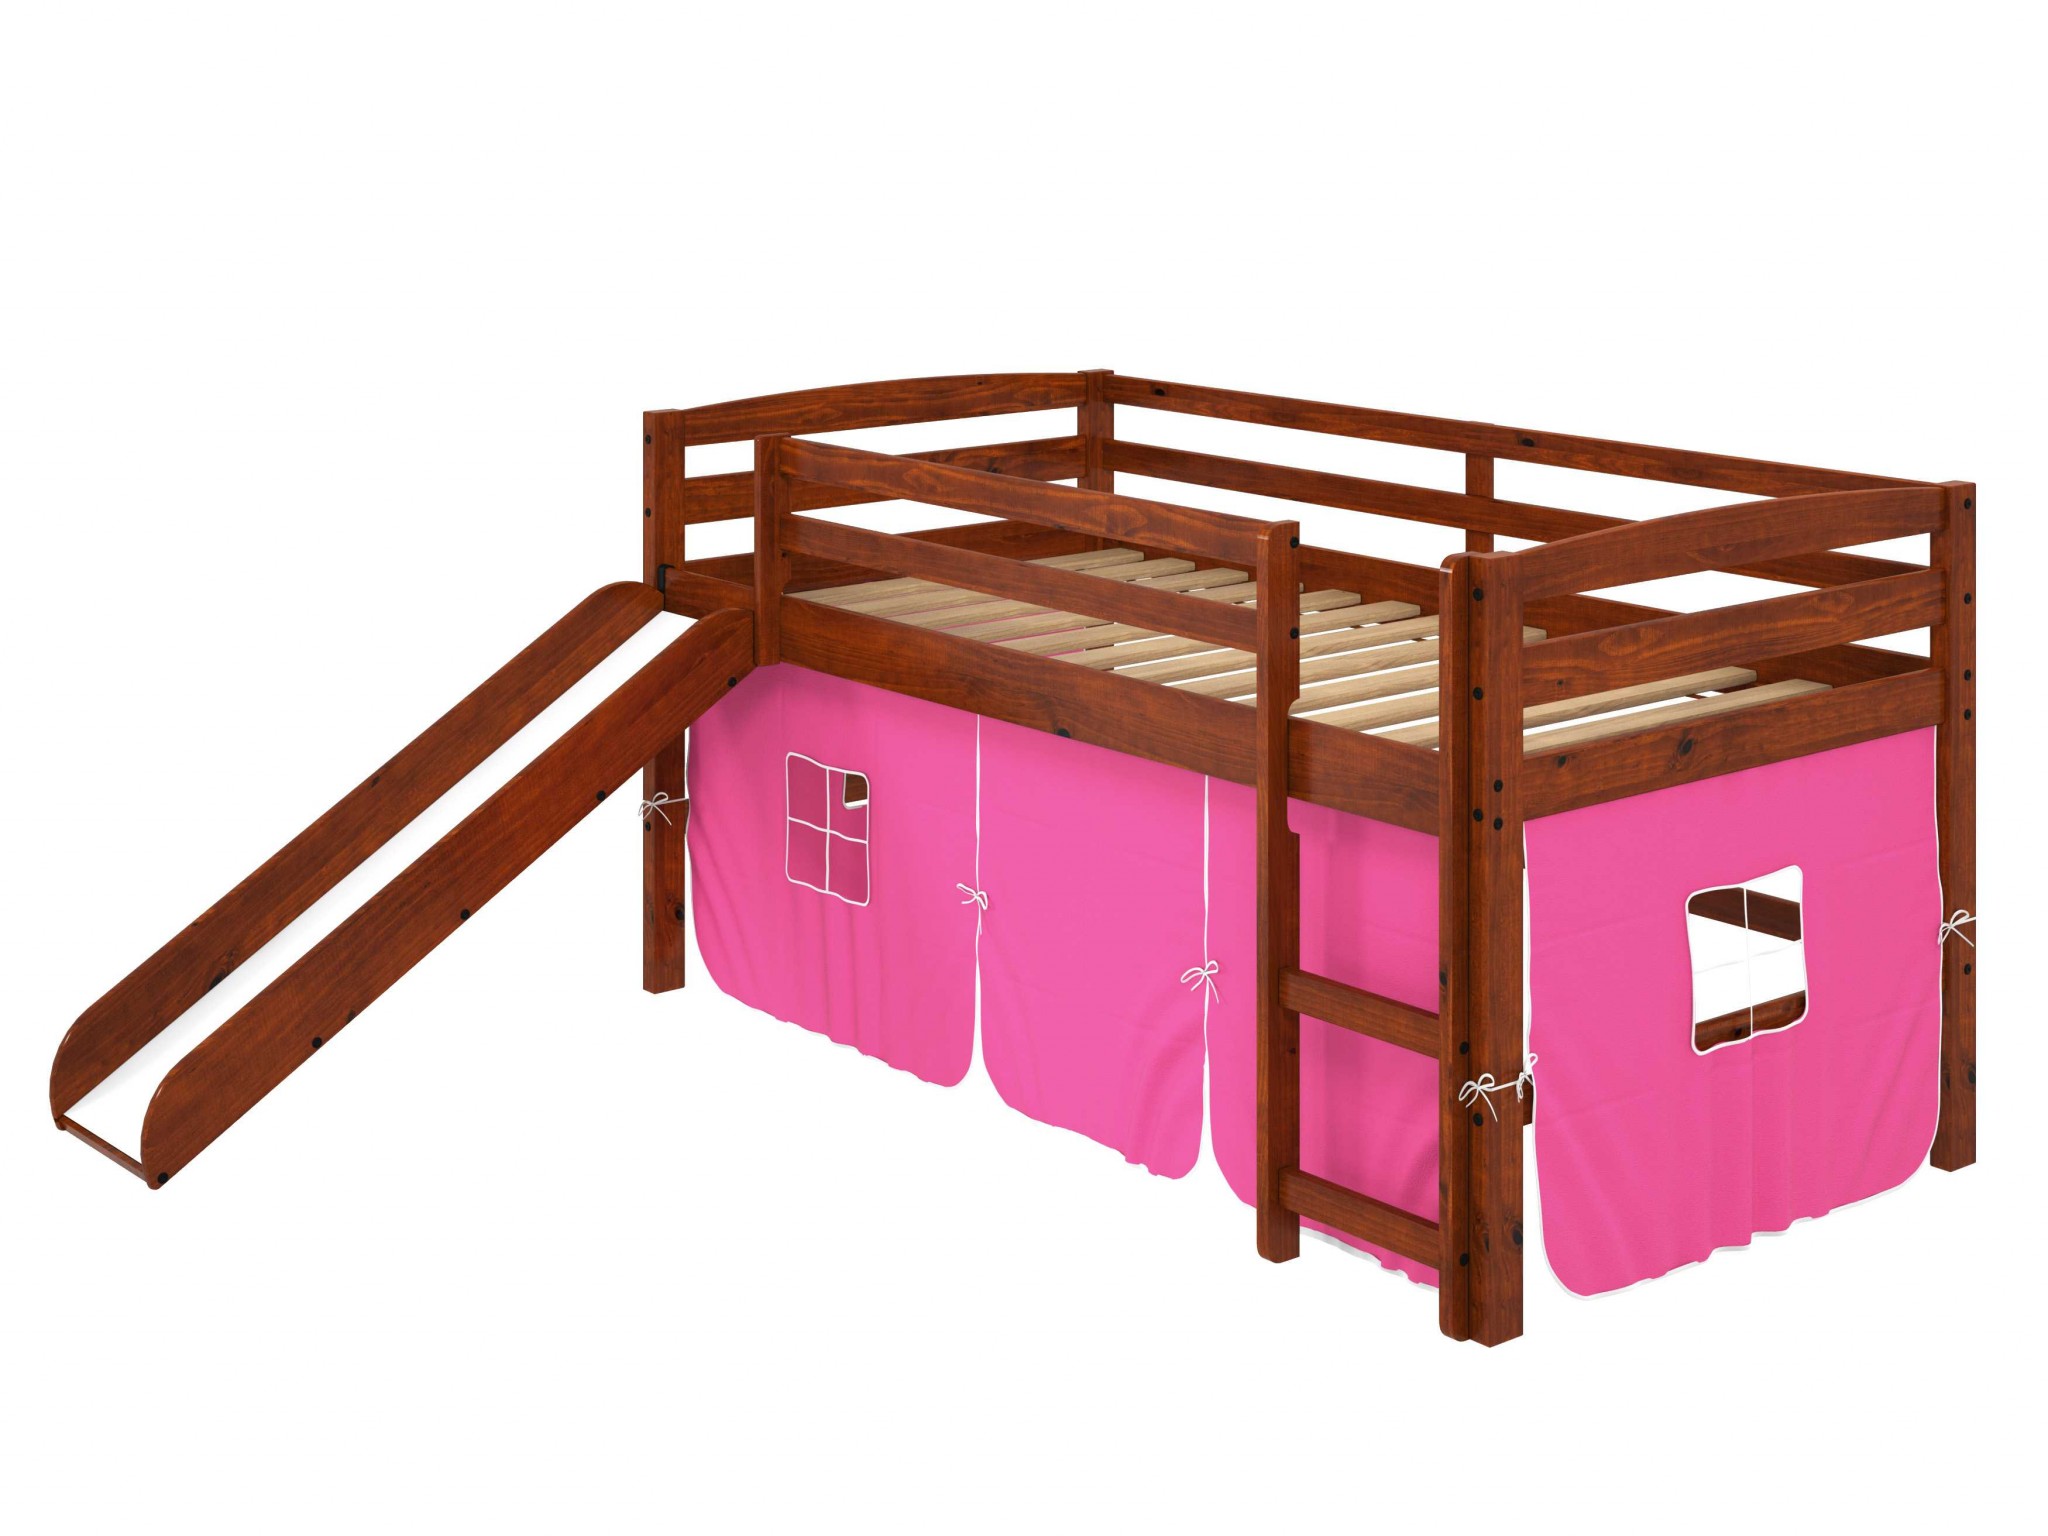 41" X 81" X 46" Chocolate Solid Pine Pink Tent Loft Bed with Slide and Ladder